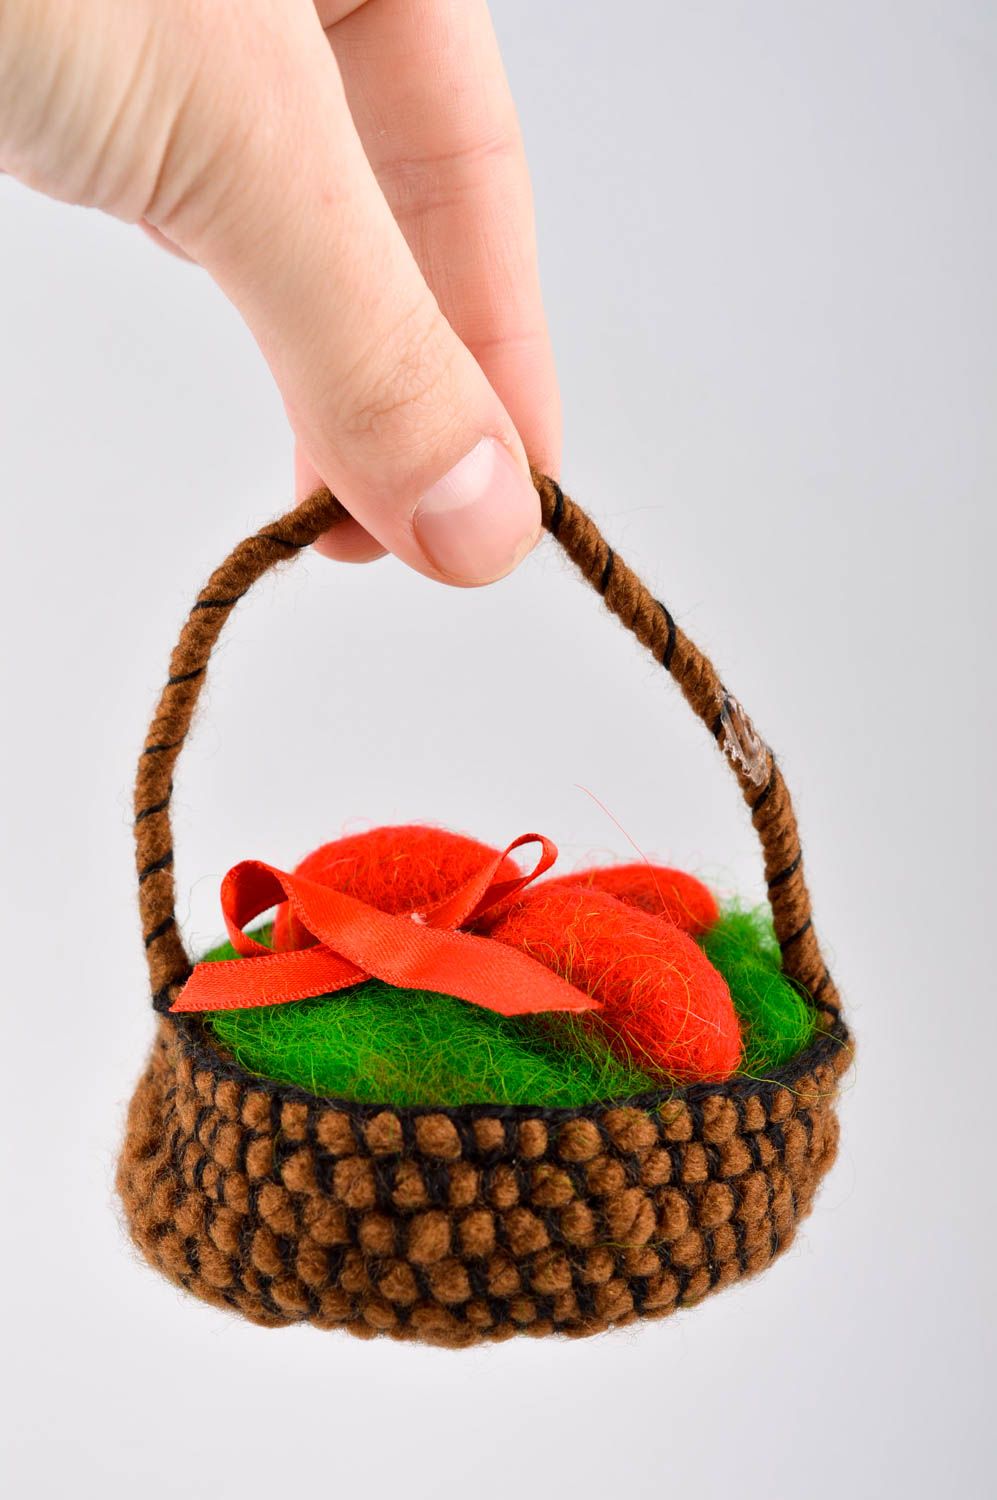 Handmade basket unusual decor for interior decorative use only gift ideas photo 4